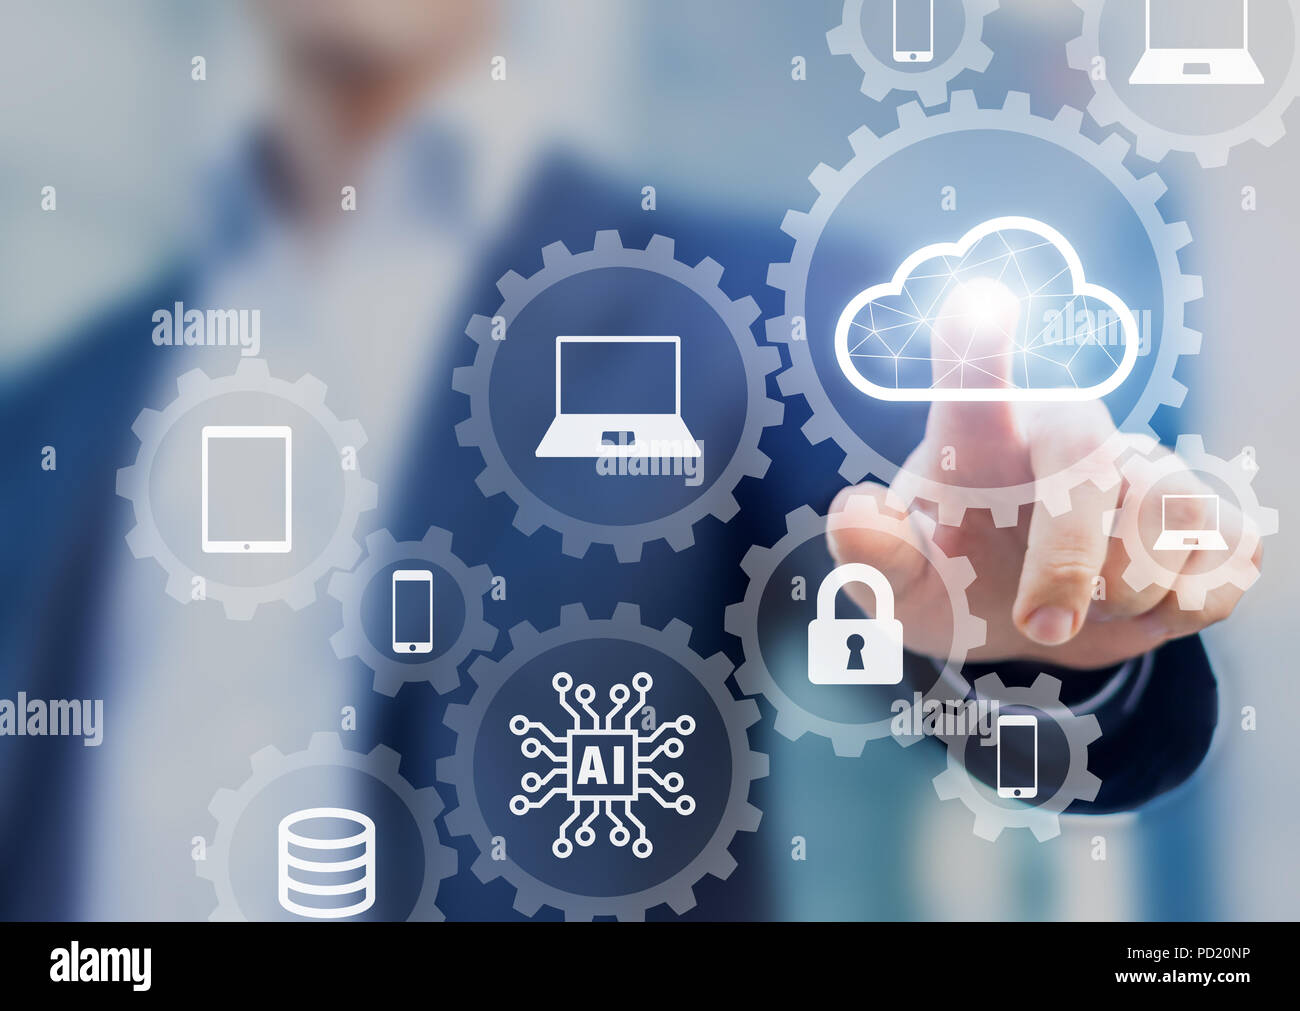 Cloud computing information technology concept, data processing and storage platform connected to internet network, specialist engineering system Stock Photo